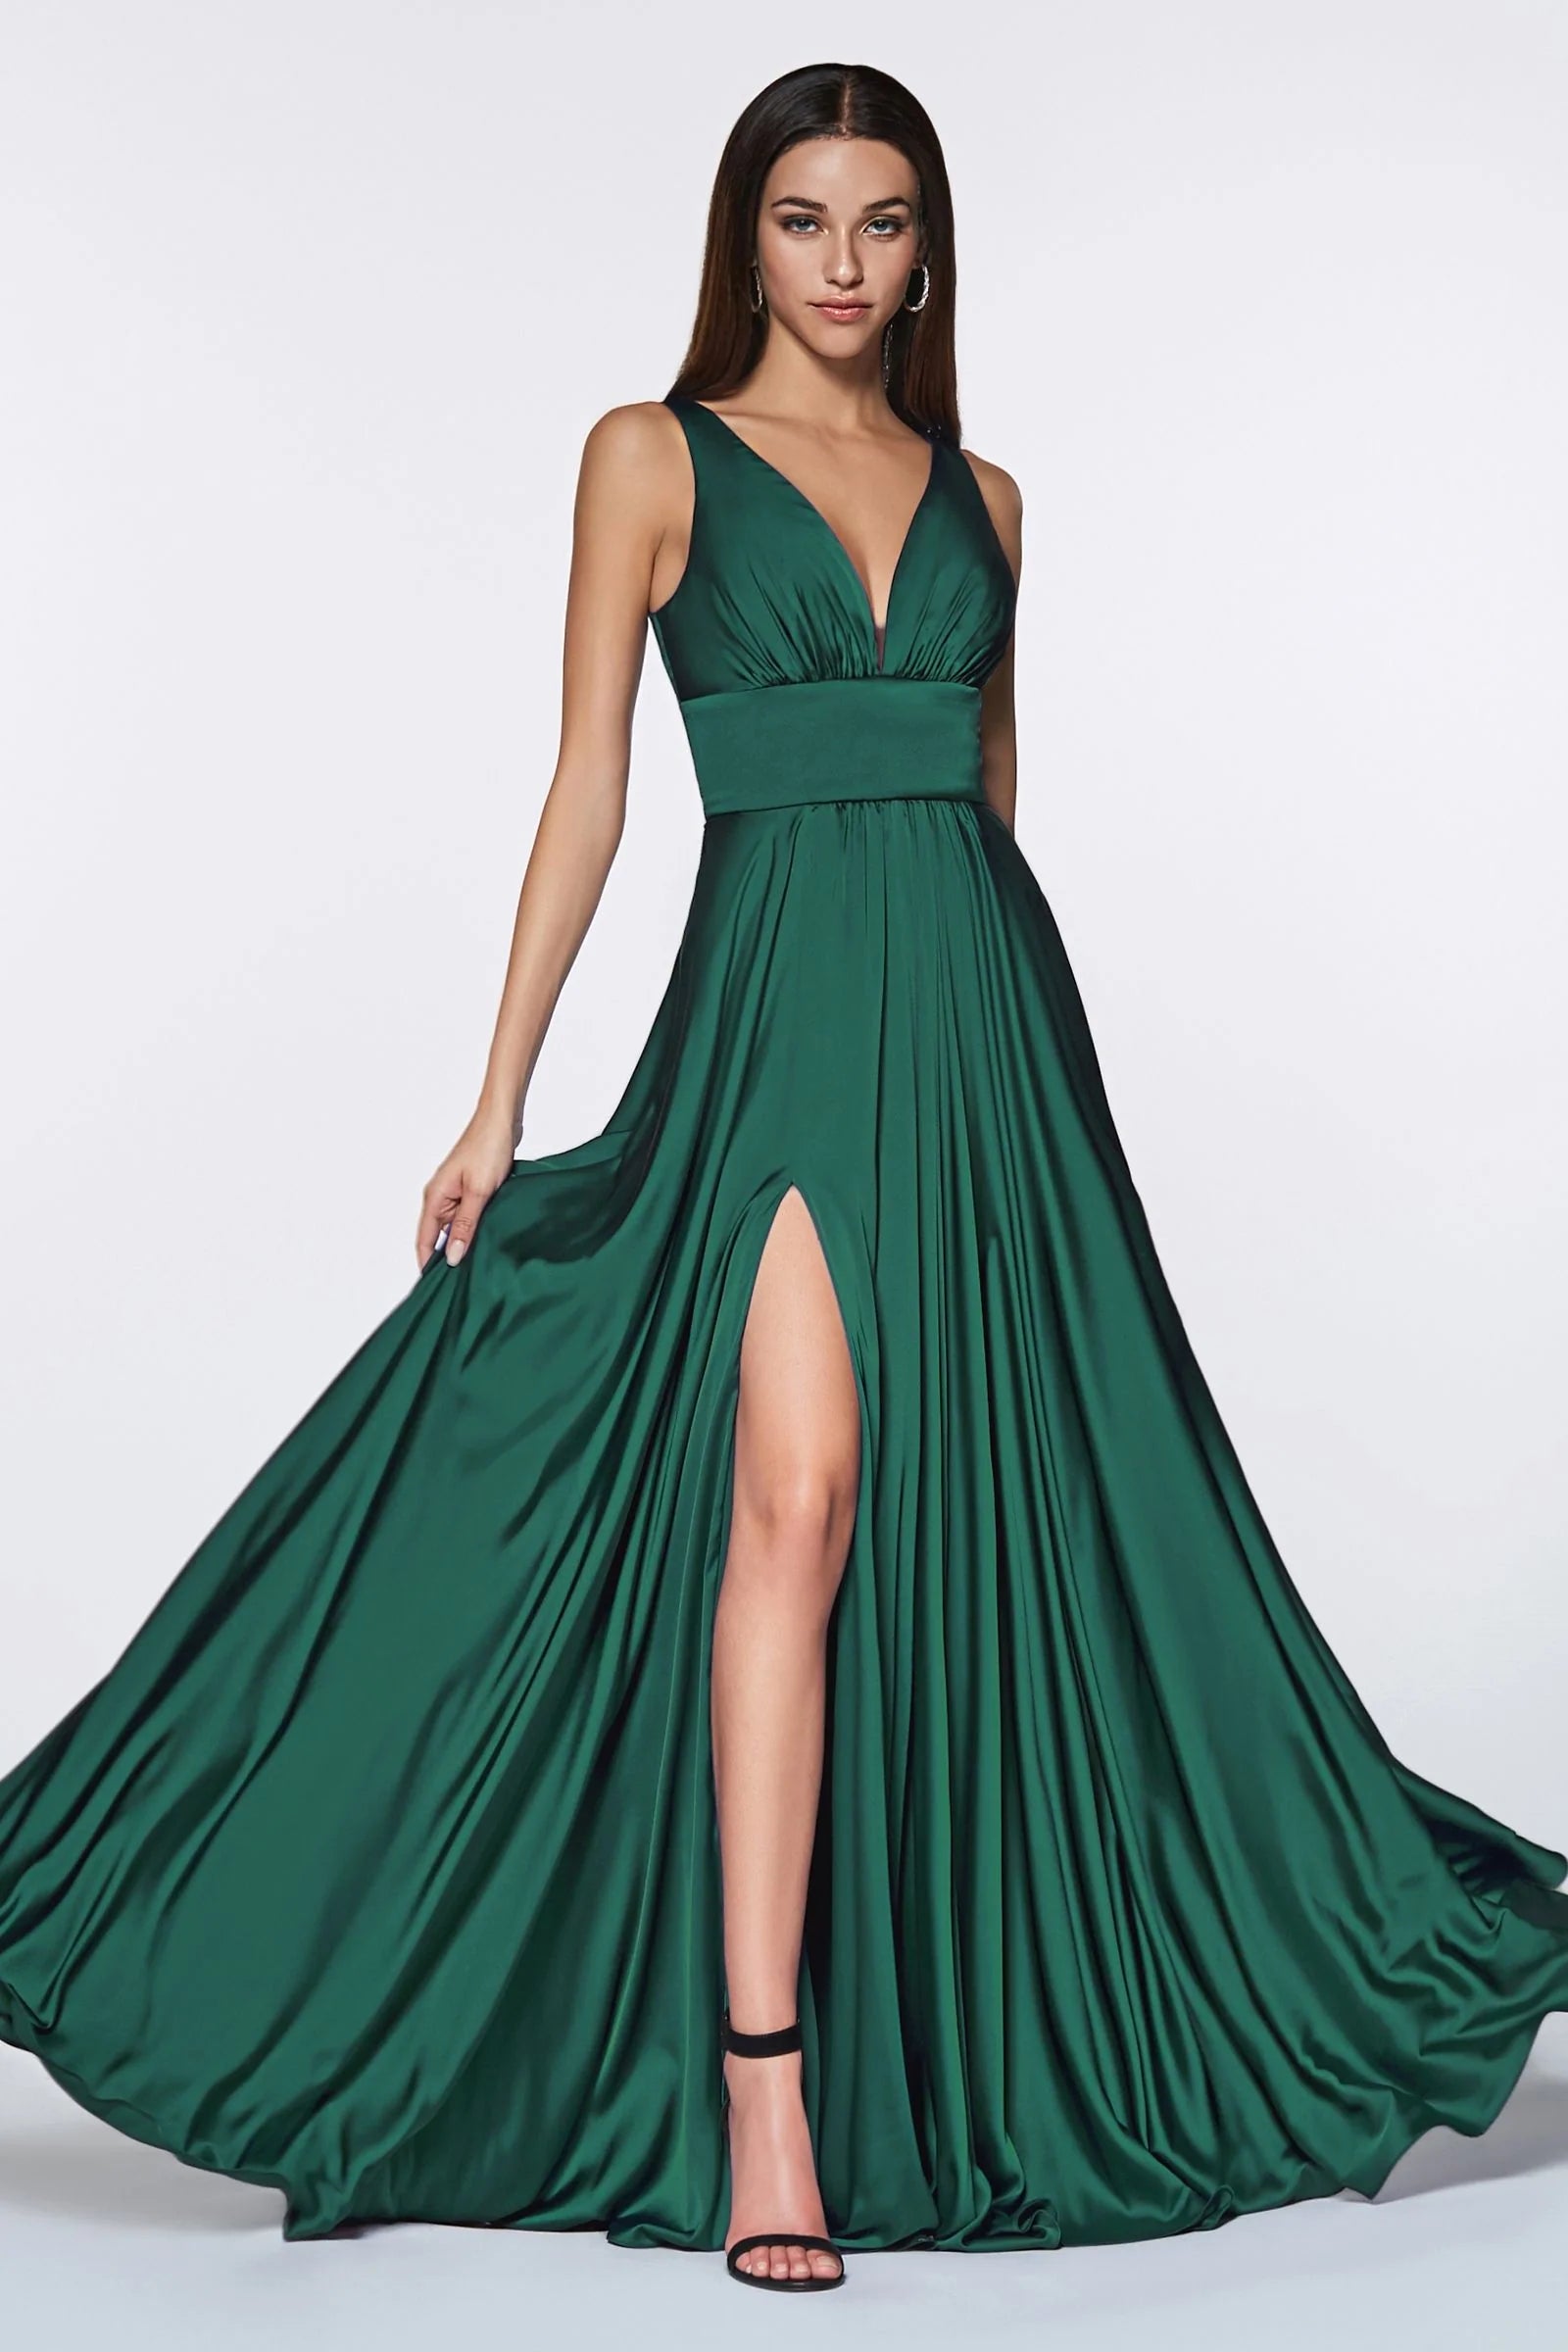 Ladivine Forest Green Satin A-Line Evening Gown